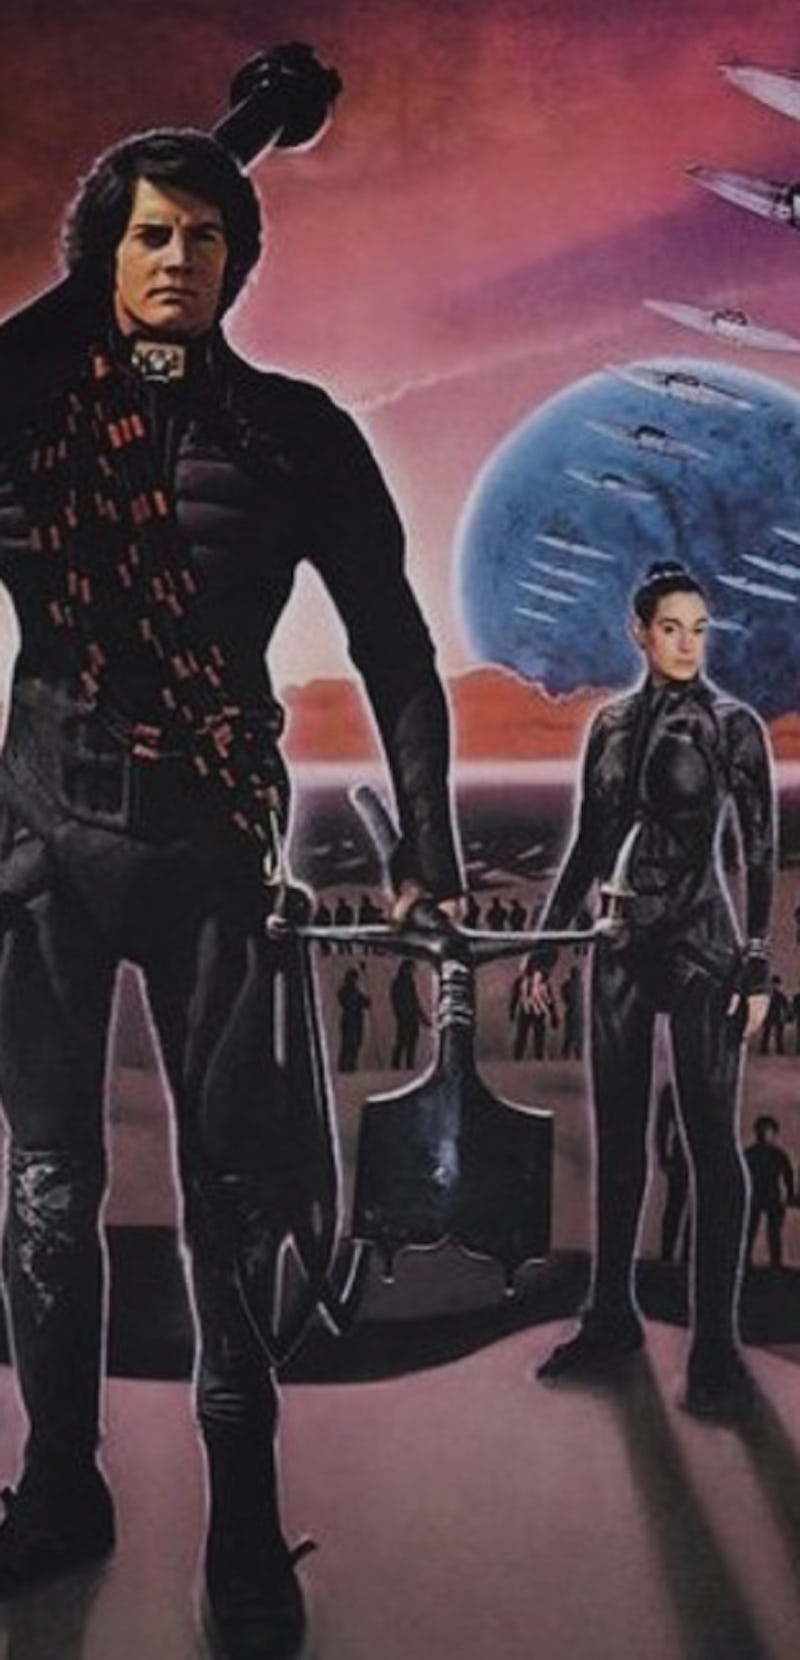 poster with characters from david lynch's dune movie